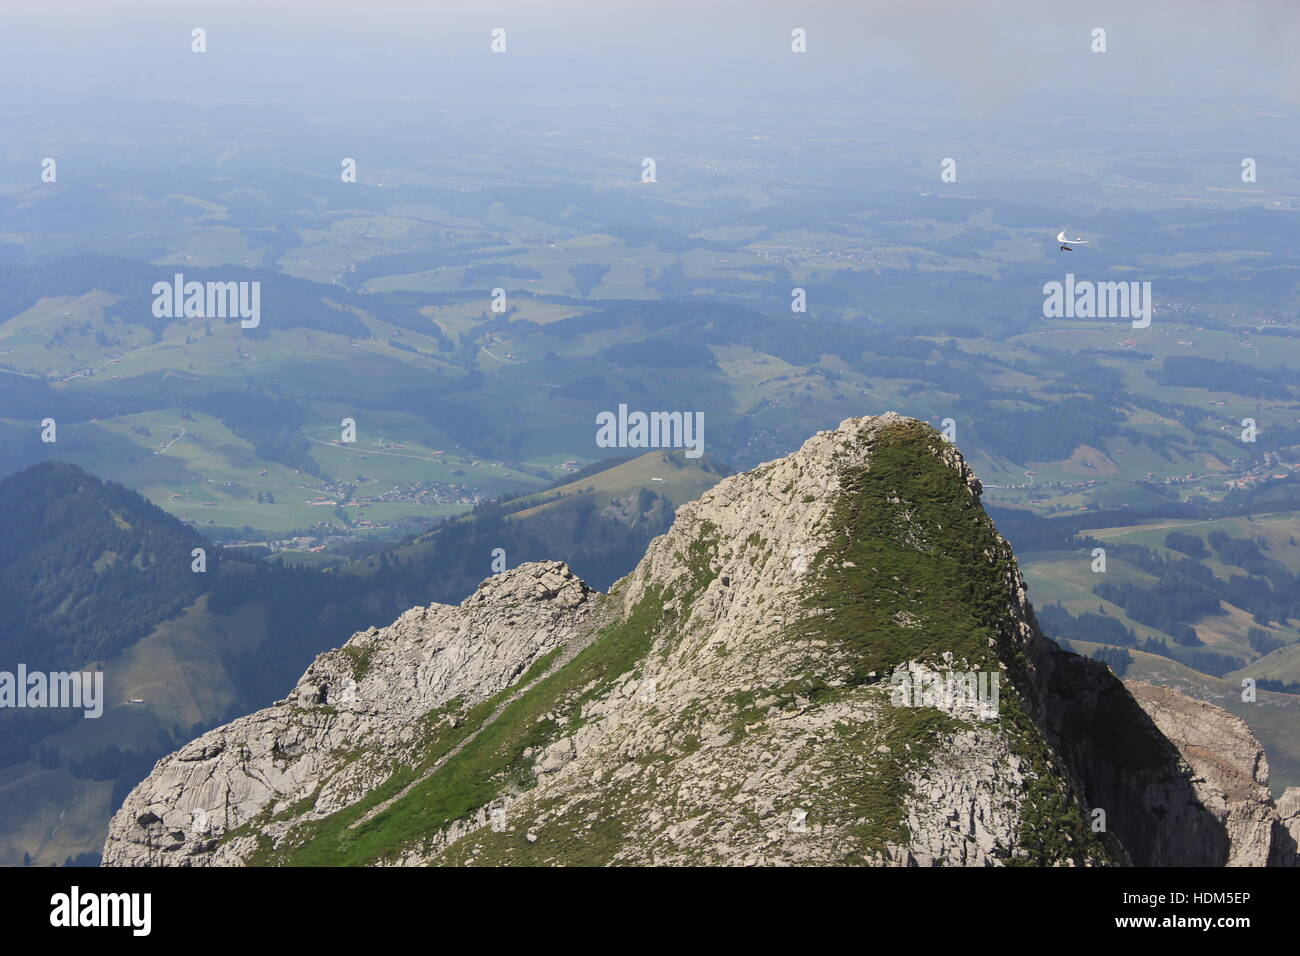 A hang glider passes over a peak near Switzerland's Säntis Mountain in the Swiss Alps. Stock Photo